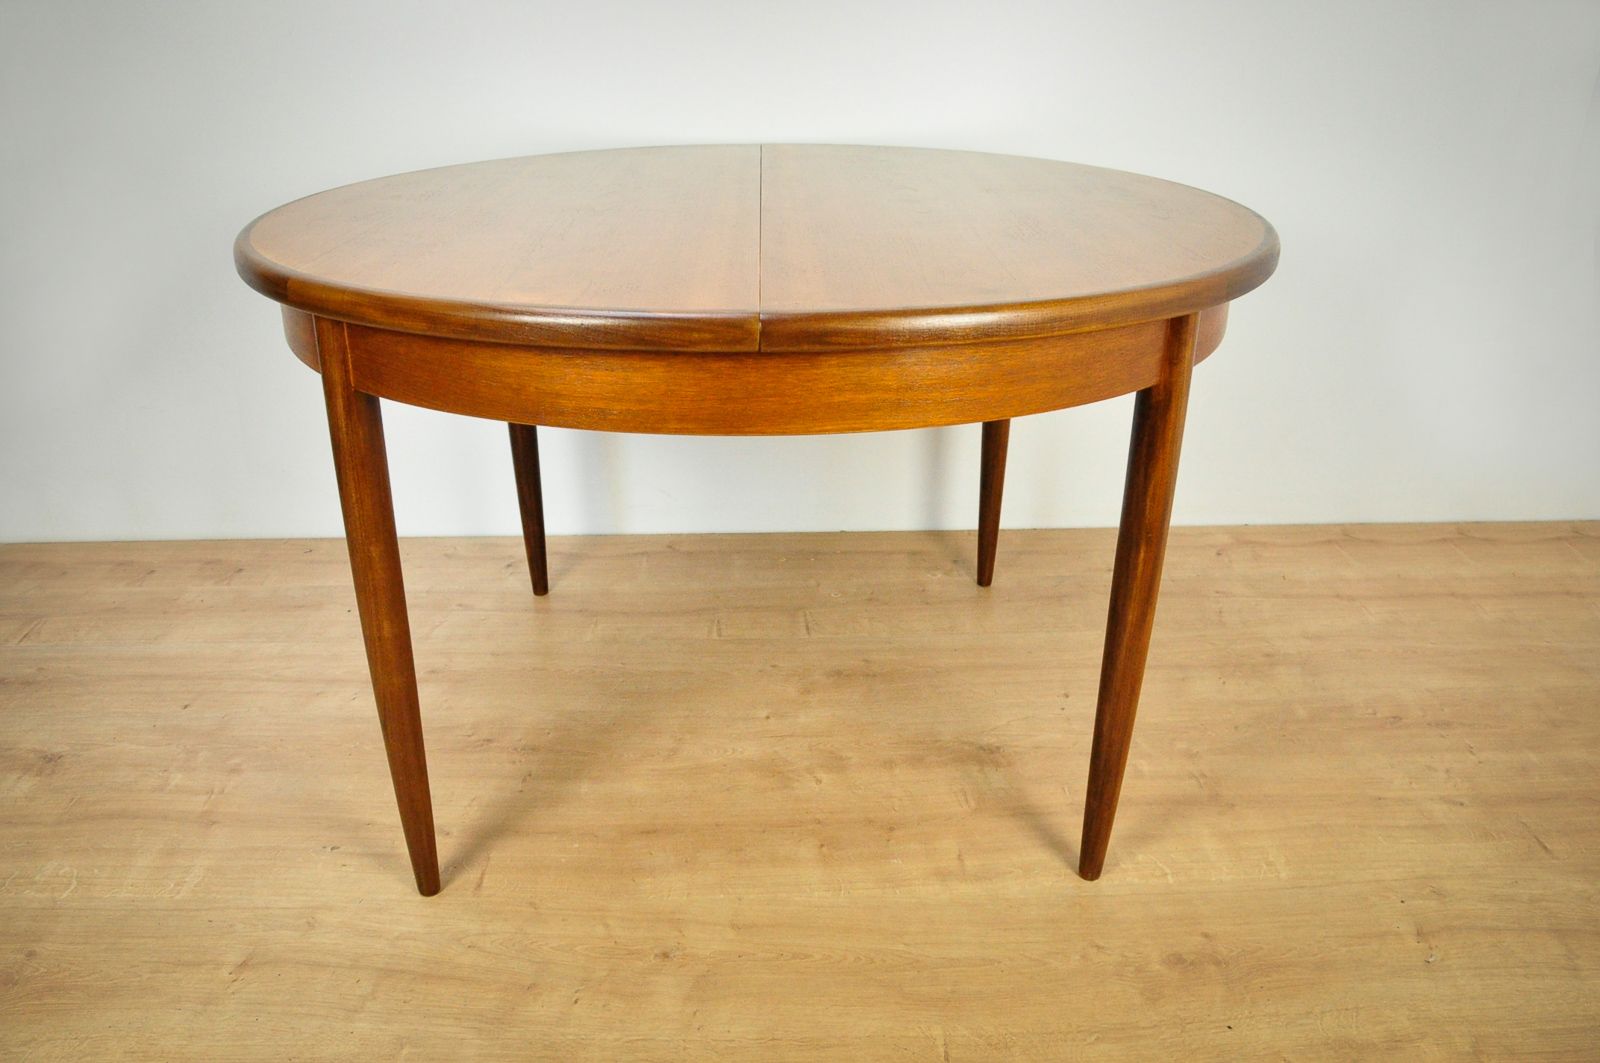 Vintage extendable round dining table by G-Plan - Design ...